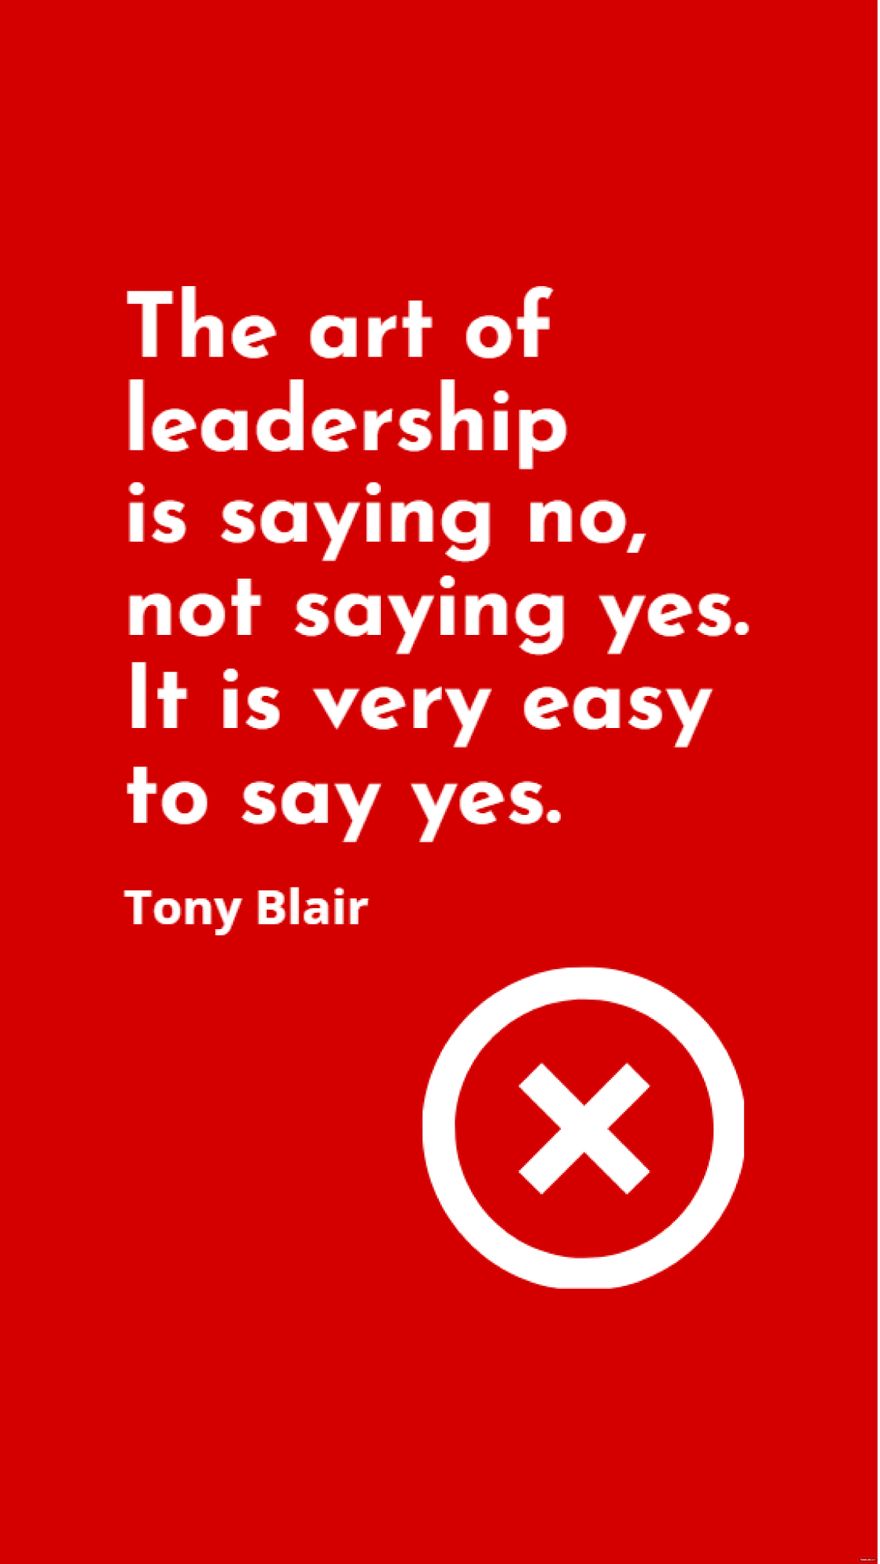 Free Tony Blair - The art of leadership is saying no, not saying yes. It is very easy to say yes. in JPG